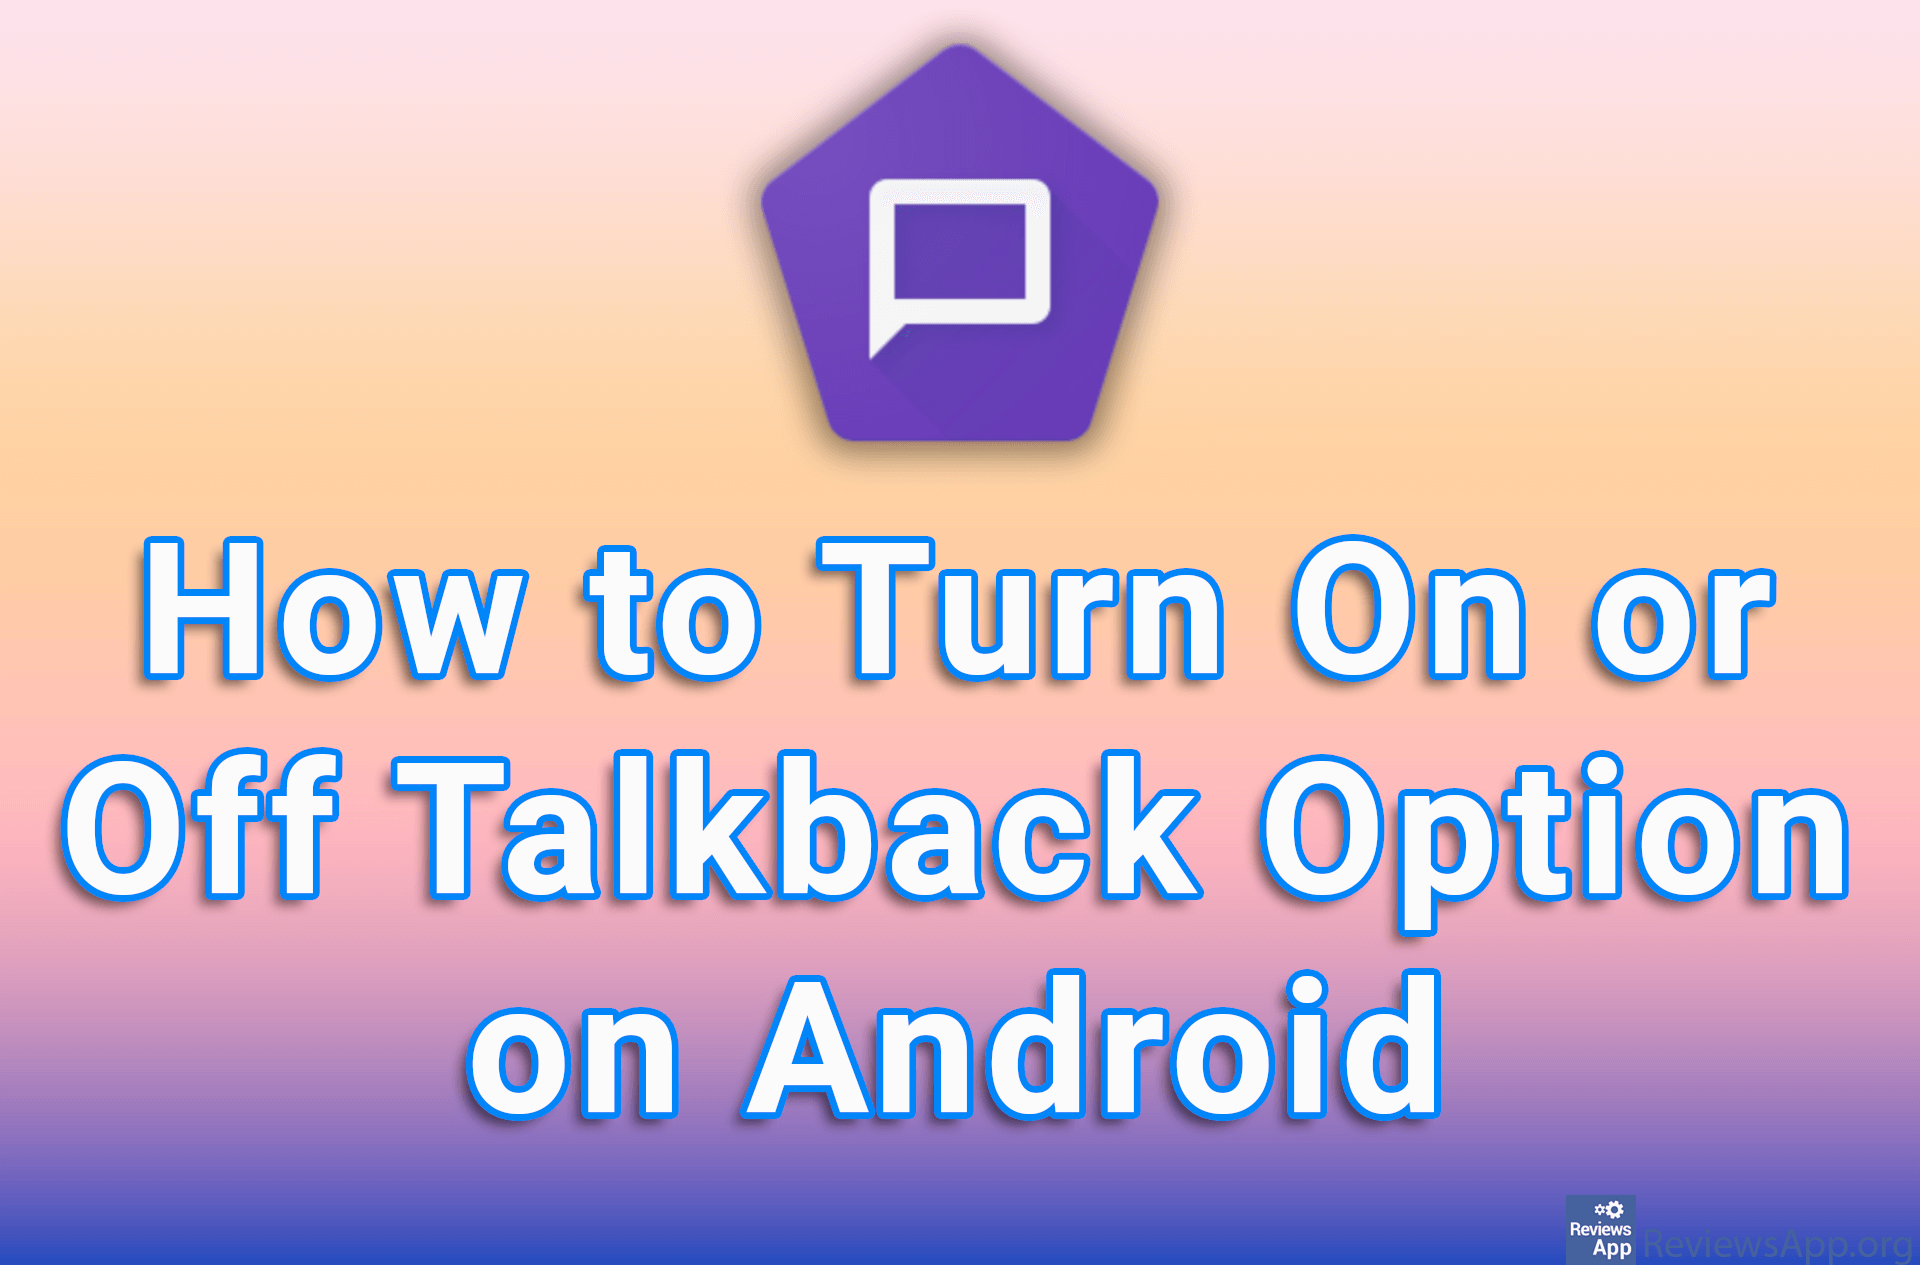 How to Turn On or Off Talkback Option on Android